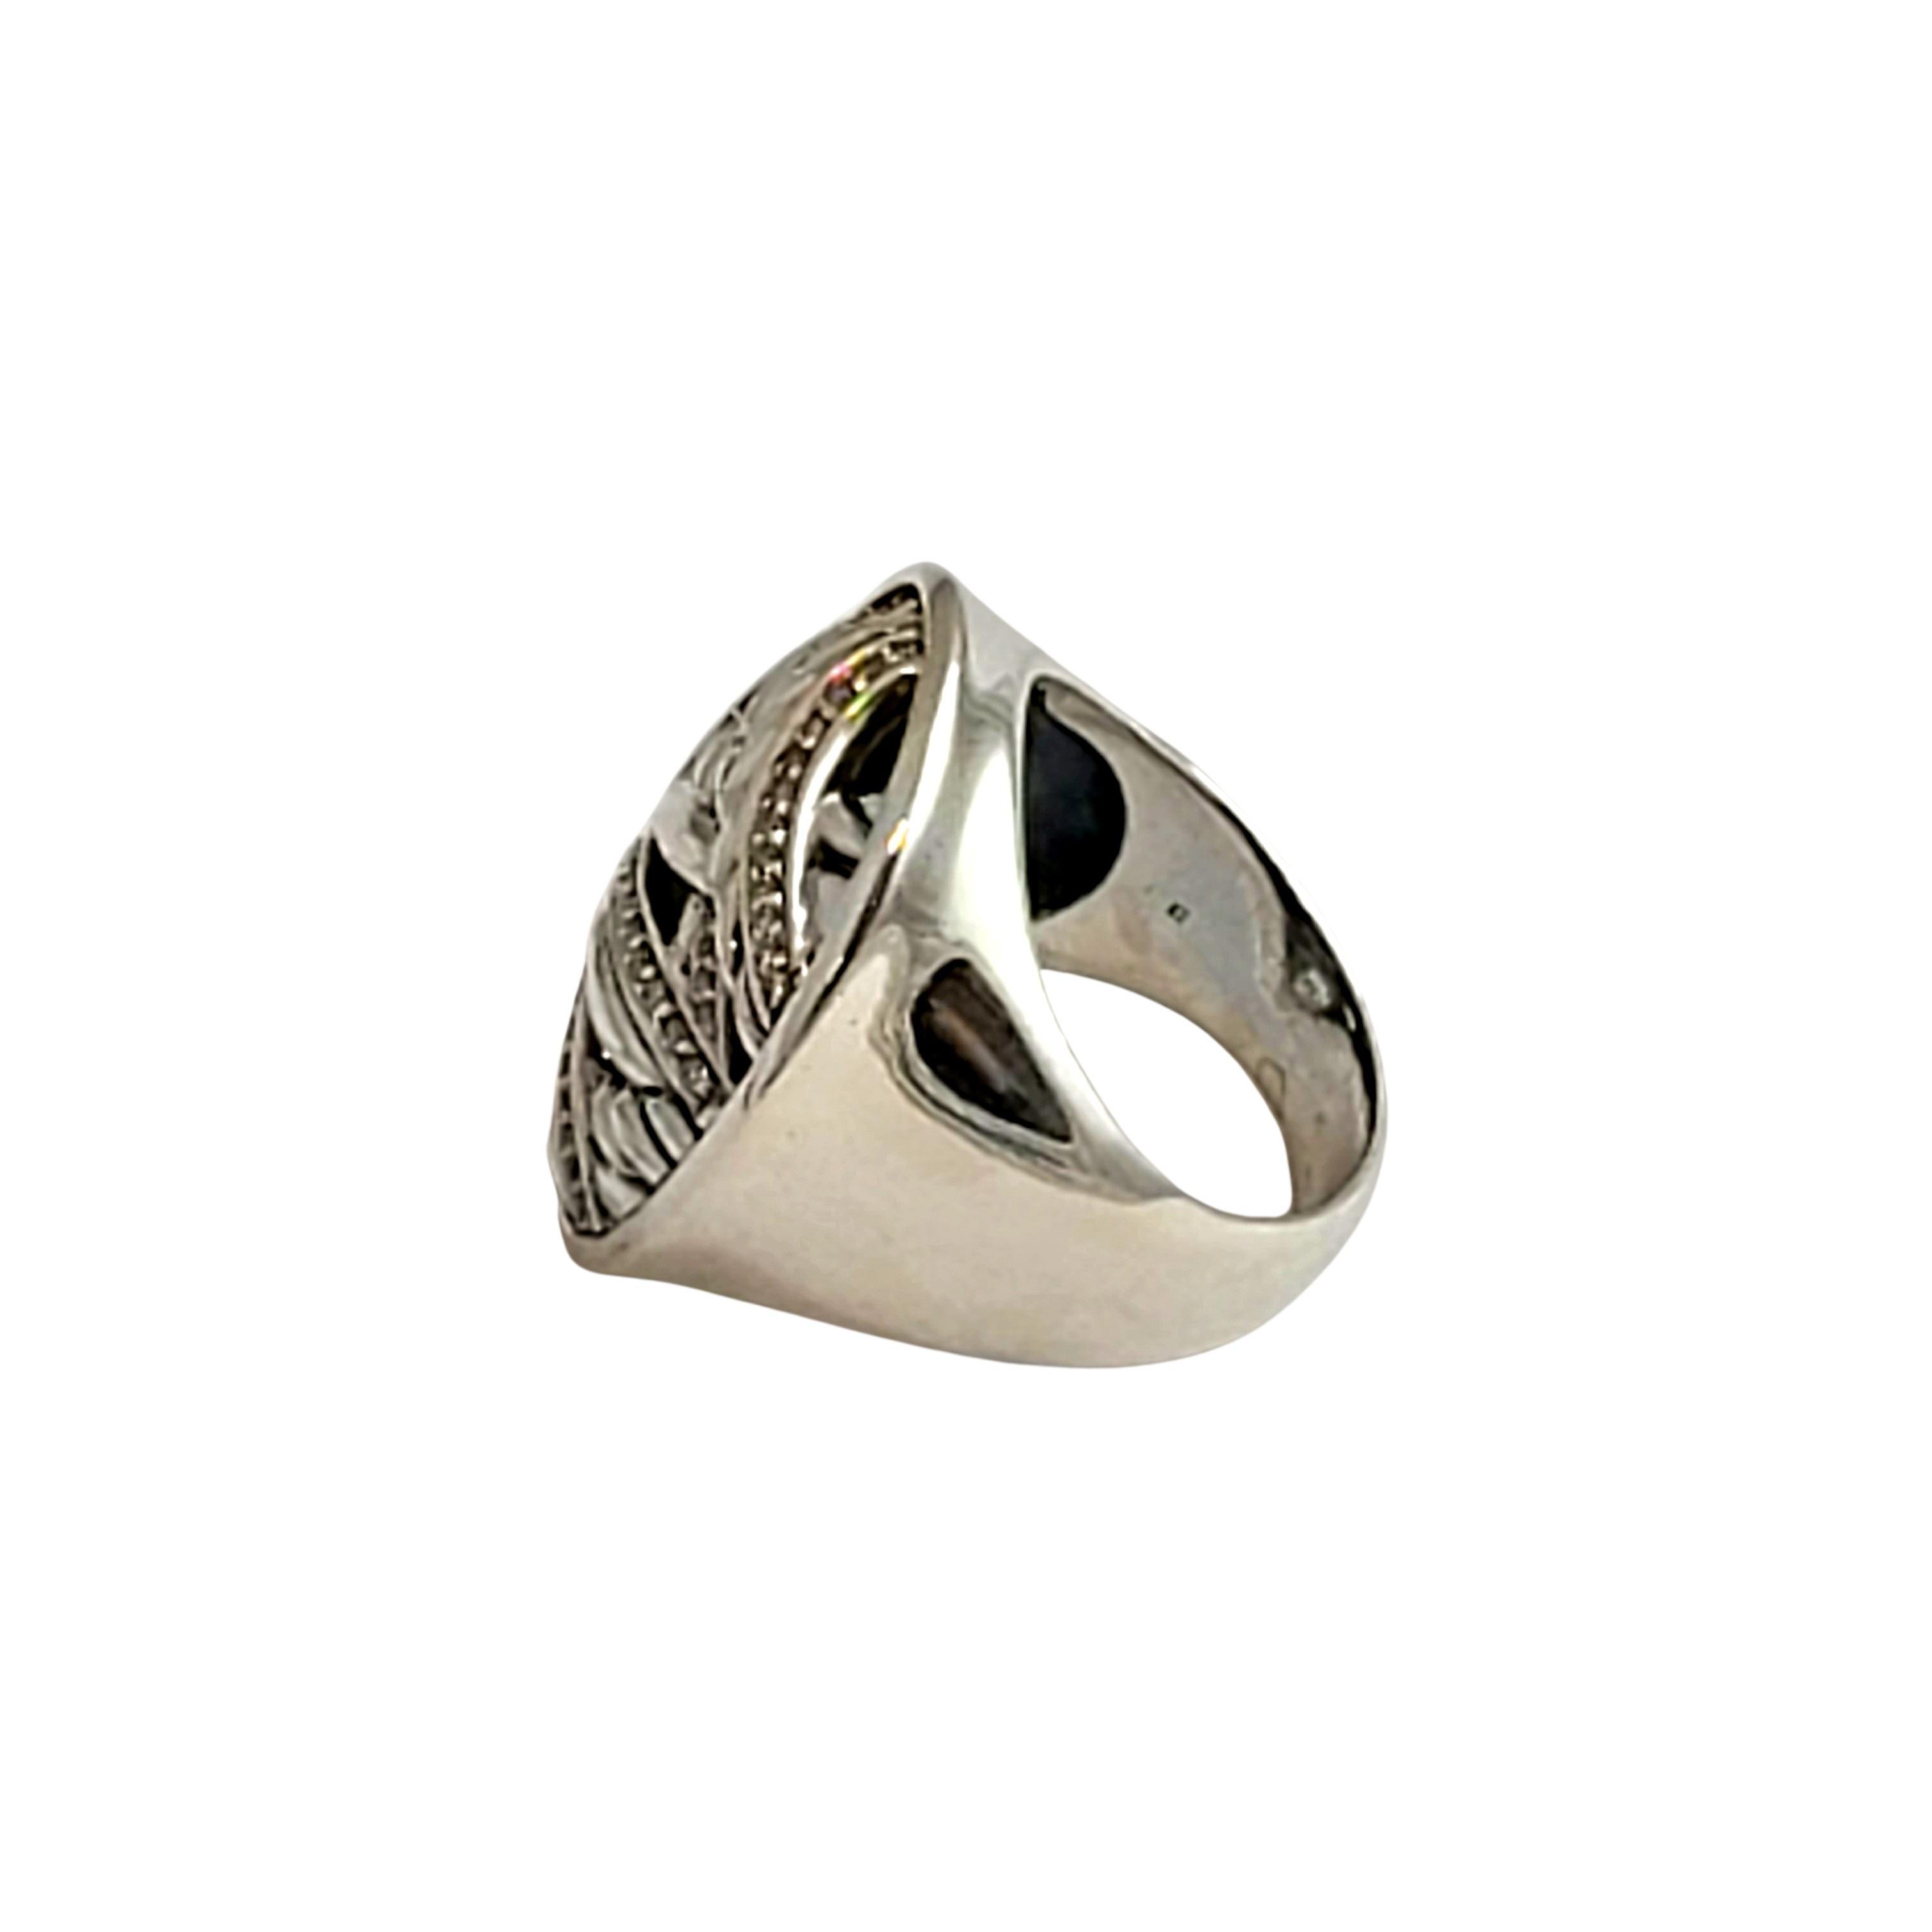 Sterling silver Diamond Papyrus Oval ring by David Yurman

Size 7.5

This beautiful sterling silver ring is by David Yurman, it features intertwined smooth polished, cable and diamond strands. Approximately .28 total carat weight.

Measures approx